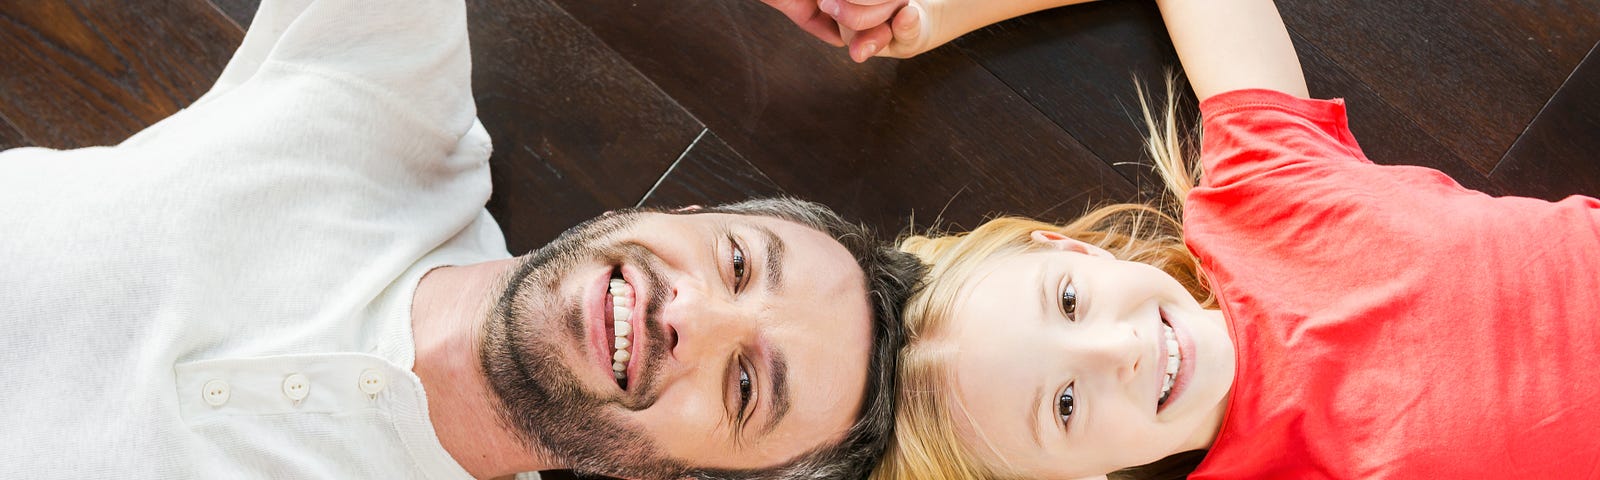 ADHD father with his ADHD daughter holding hands laying on the floor playing